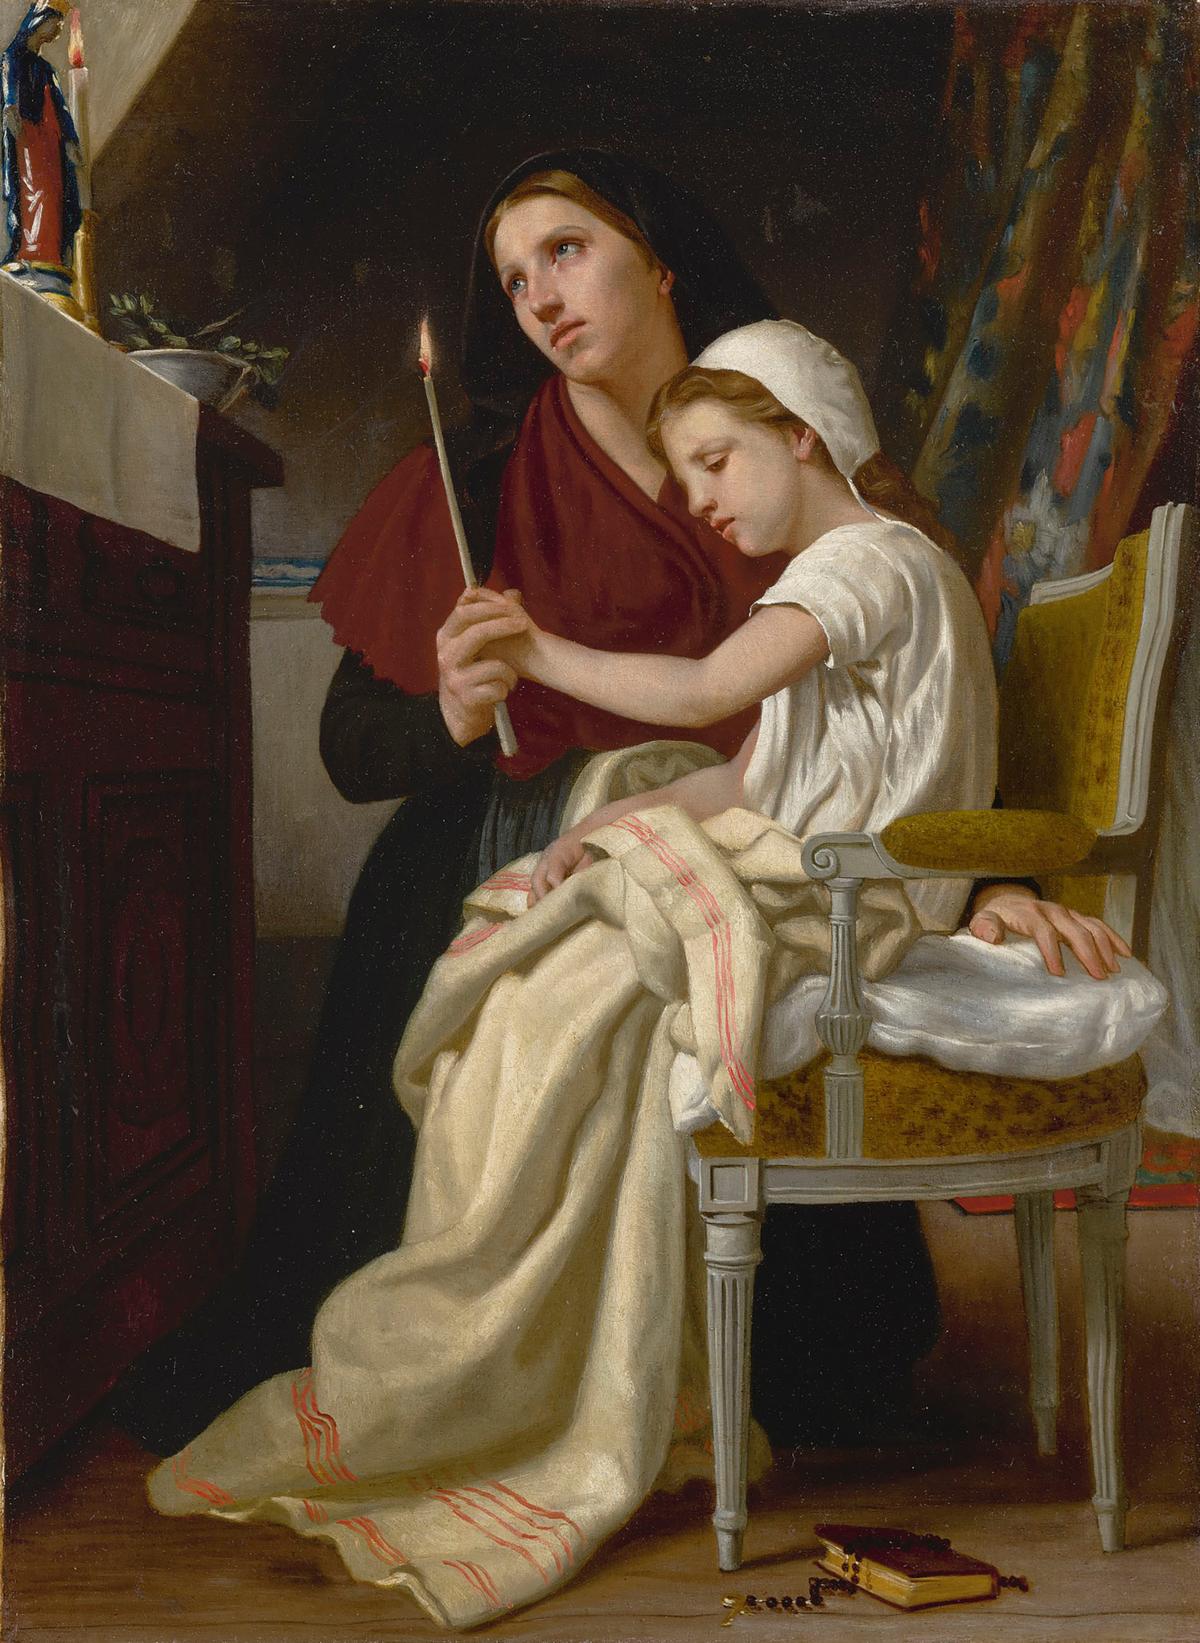 Some take consolation in faith. “The Wish,” 1867, by William-Adolphe Bouguereau. Oil on canvas; 22.7 inches by 16.4 inches. Philadelphia Museum of Art. (Public Domain)